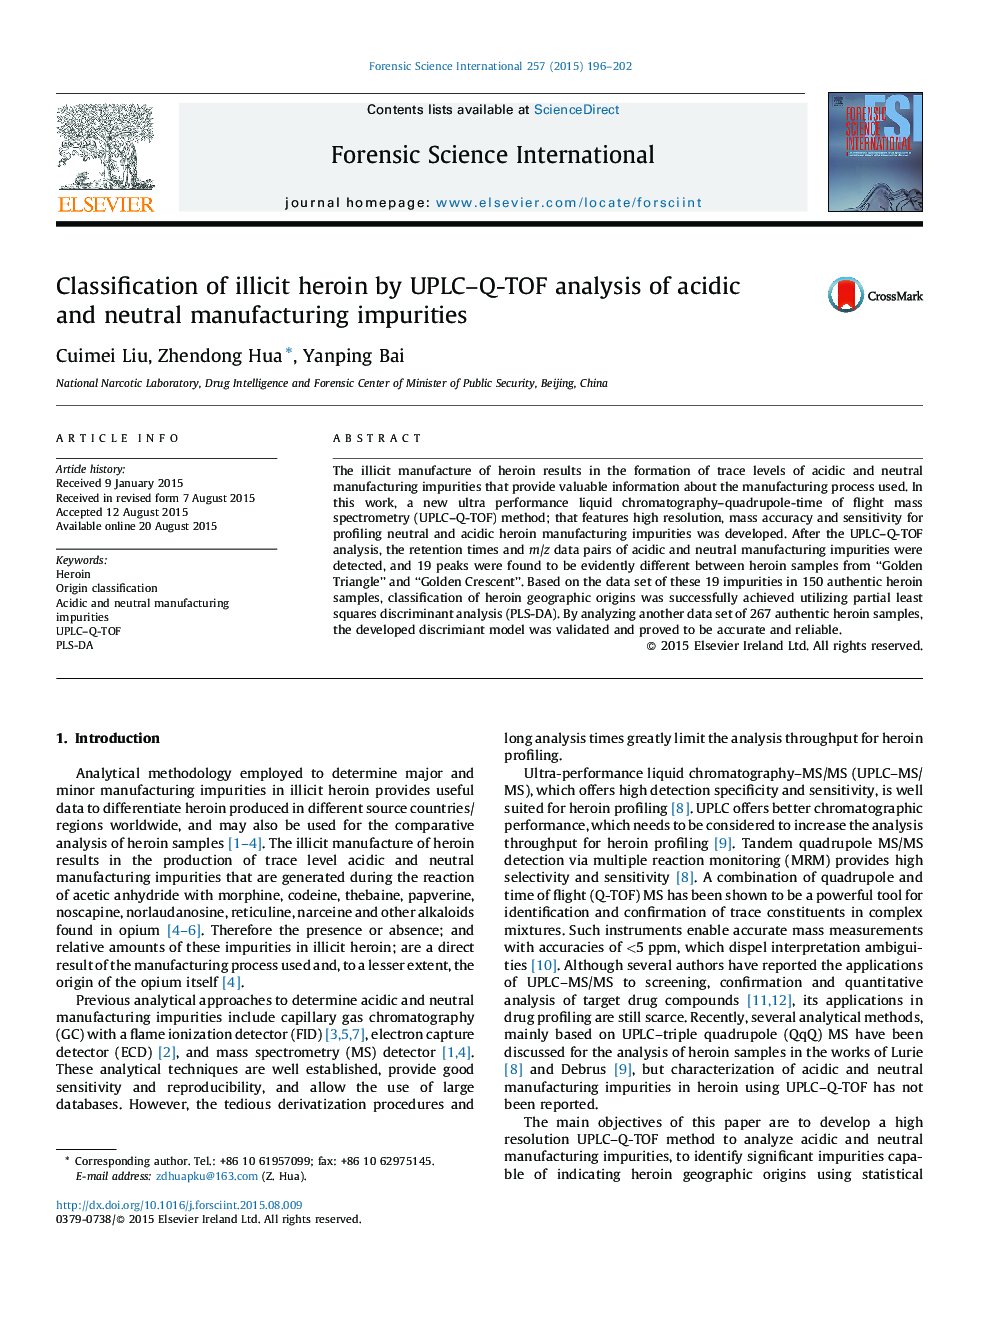 Classification of illicit heroin by UPLC-Q-TOF analysis of acidic and neutral manufacturing impurities